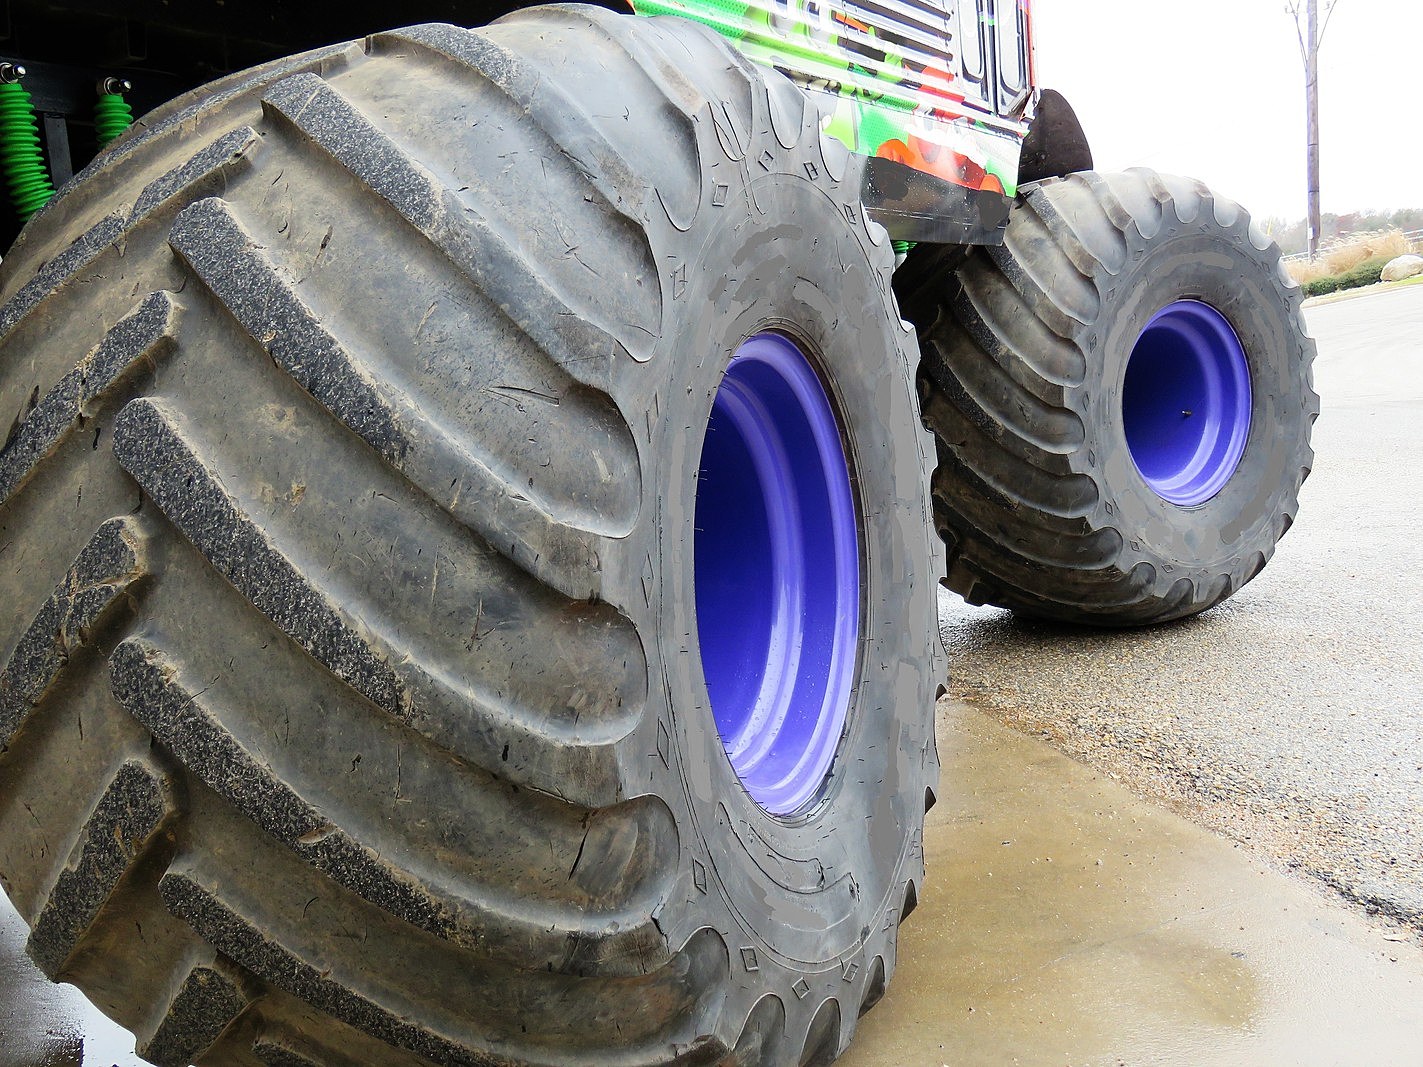 The Monster Truck Nitro Tour is Bigger and Back in the QC